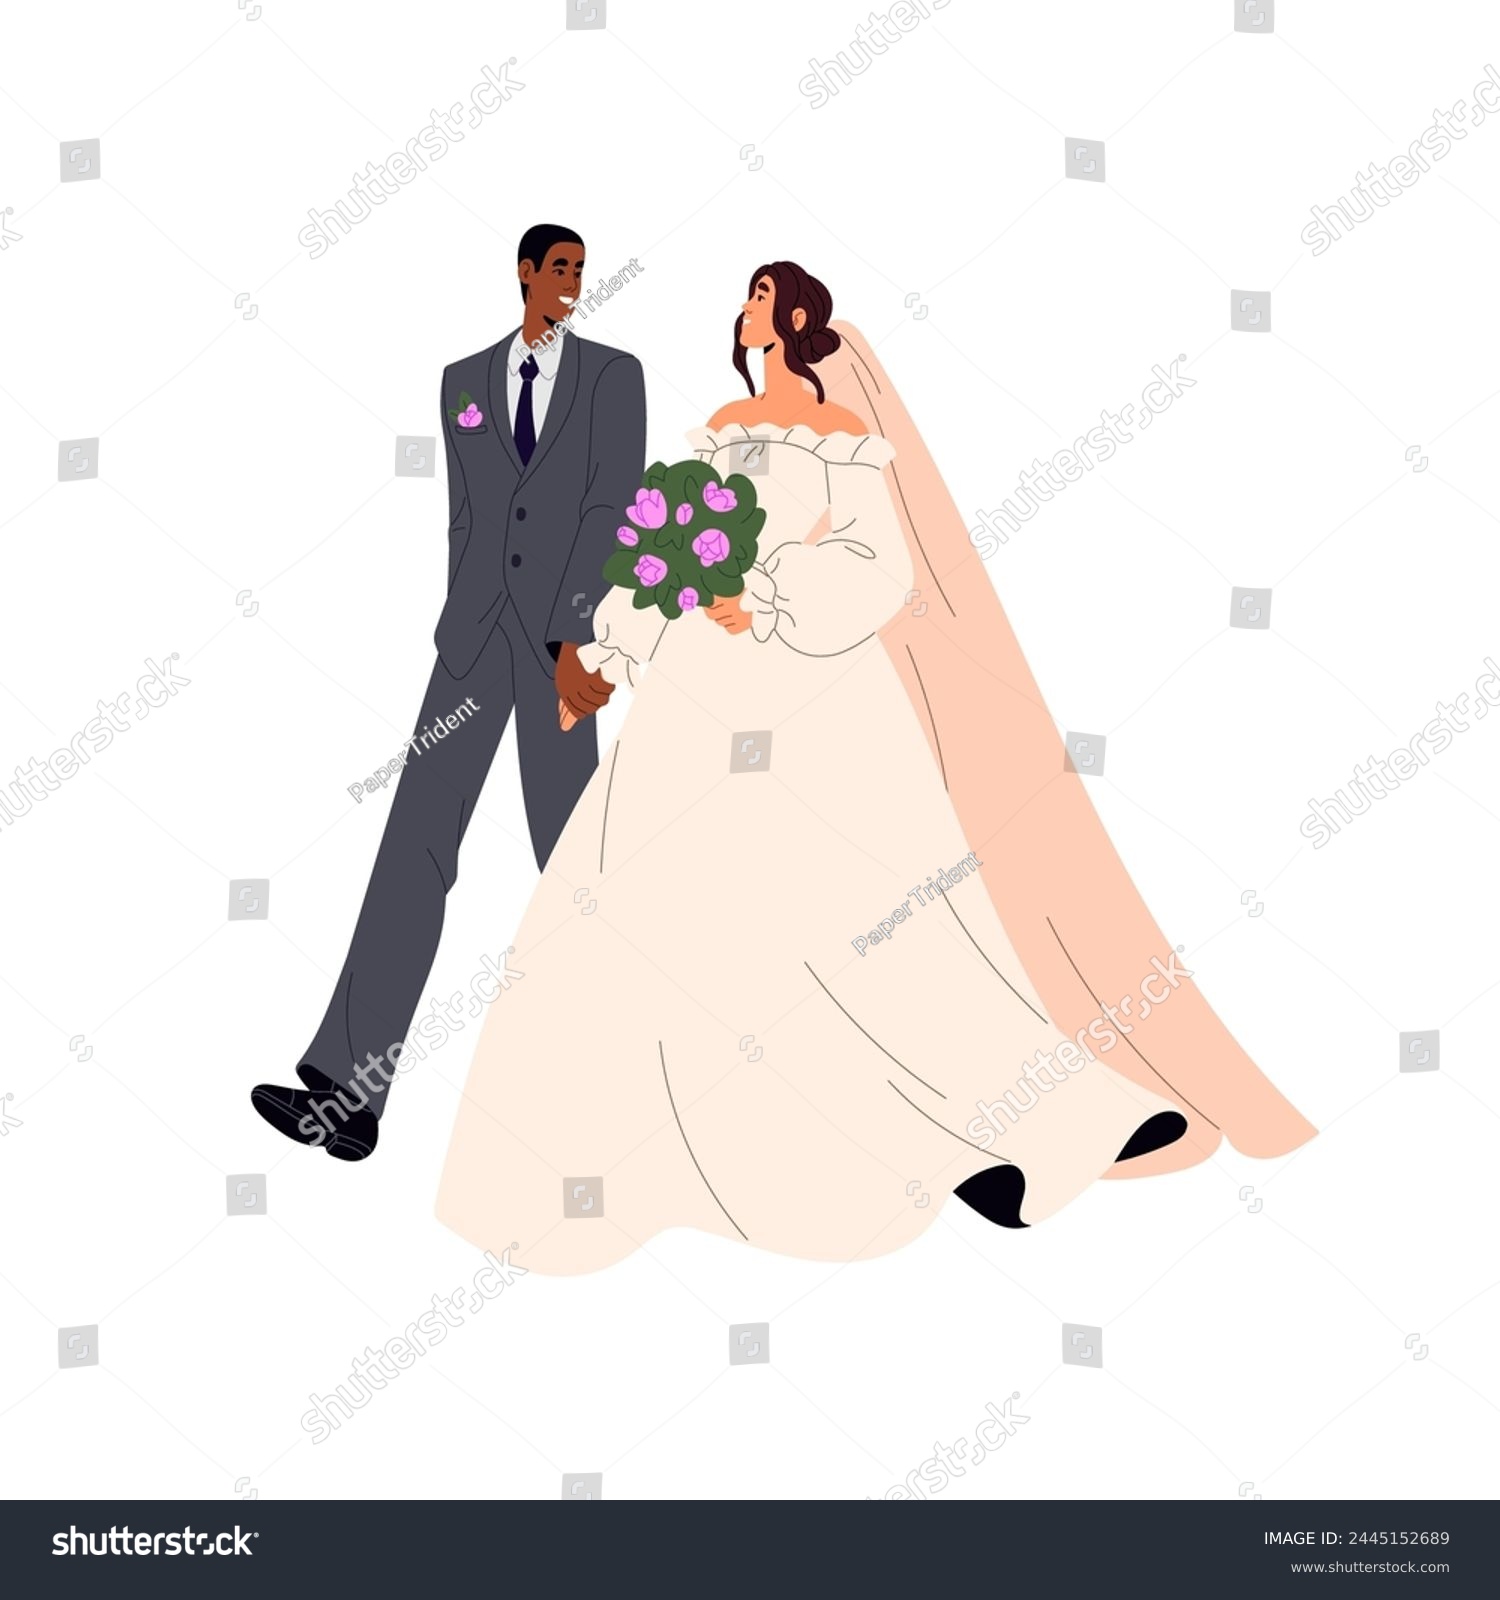 SVG of Newlywed family holds hands, goes. Cute interracial couple wedding. Marriage ceremony. Bride in bridal dress with veil carries bouquet. Bridegroom in suit. Flat isolated vector illustration on white svg